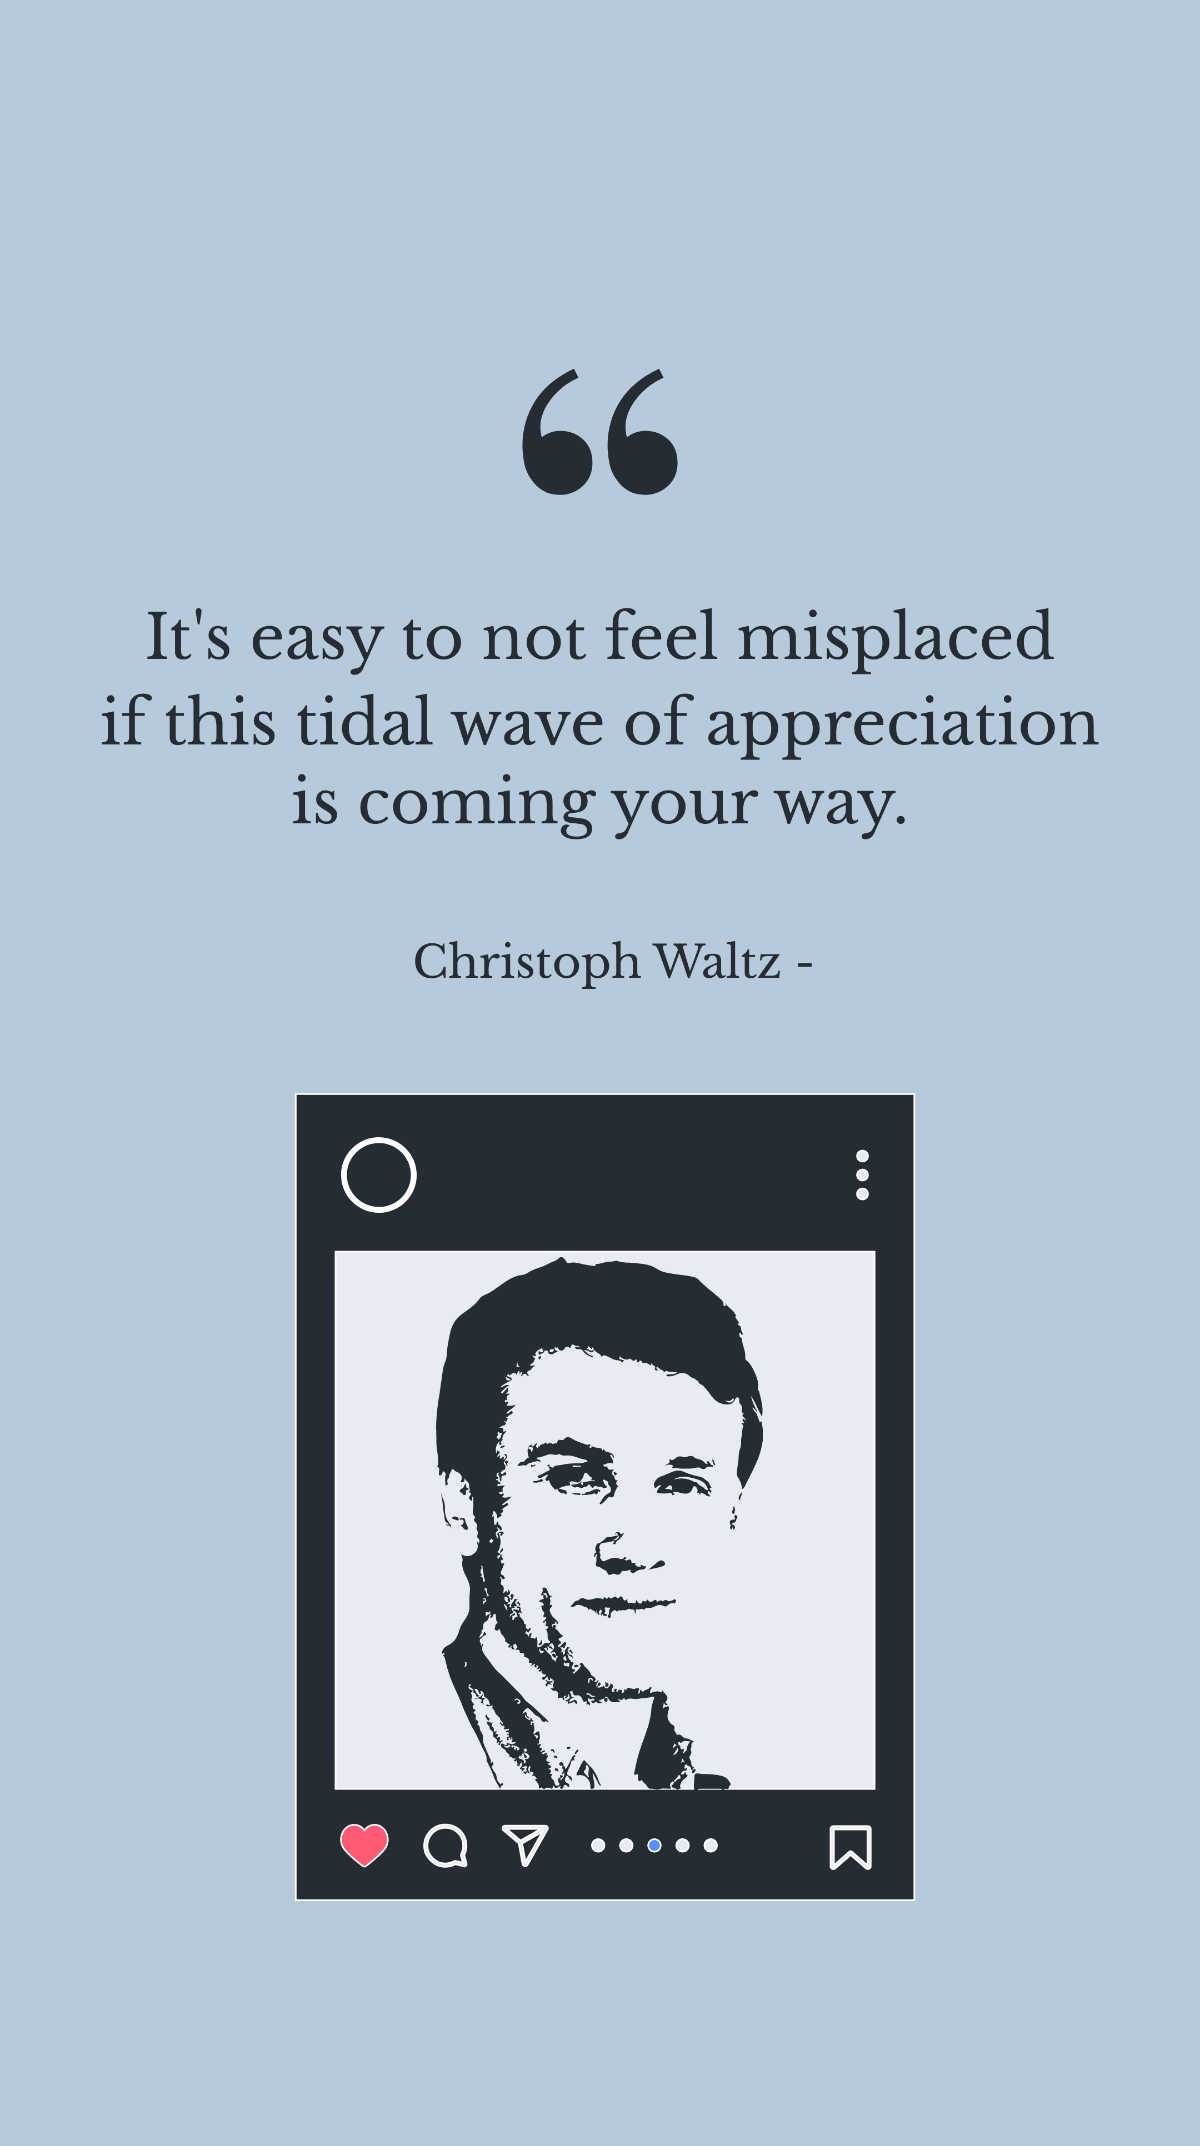 Christoph Waltz - It's easy to not feel misplaced if this tidal wave of appreciation is coming your way. Template